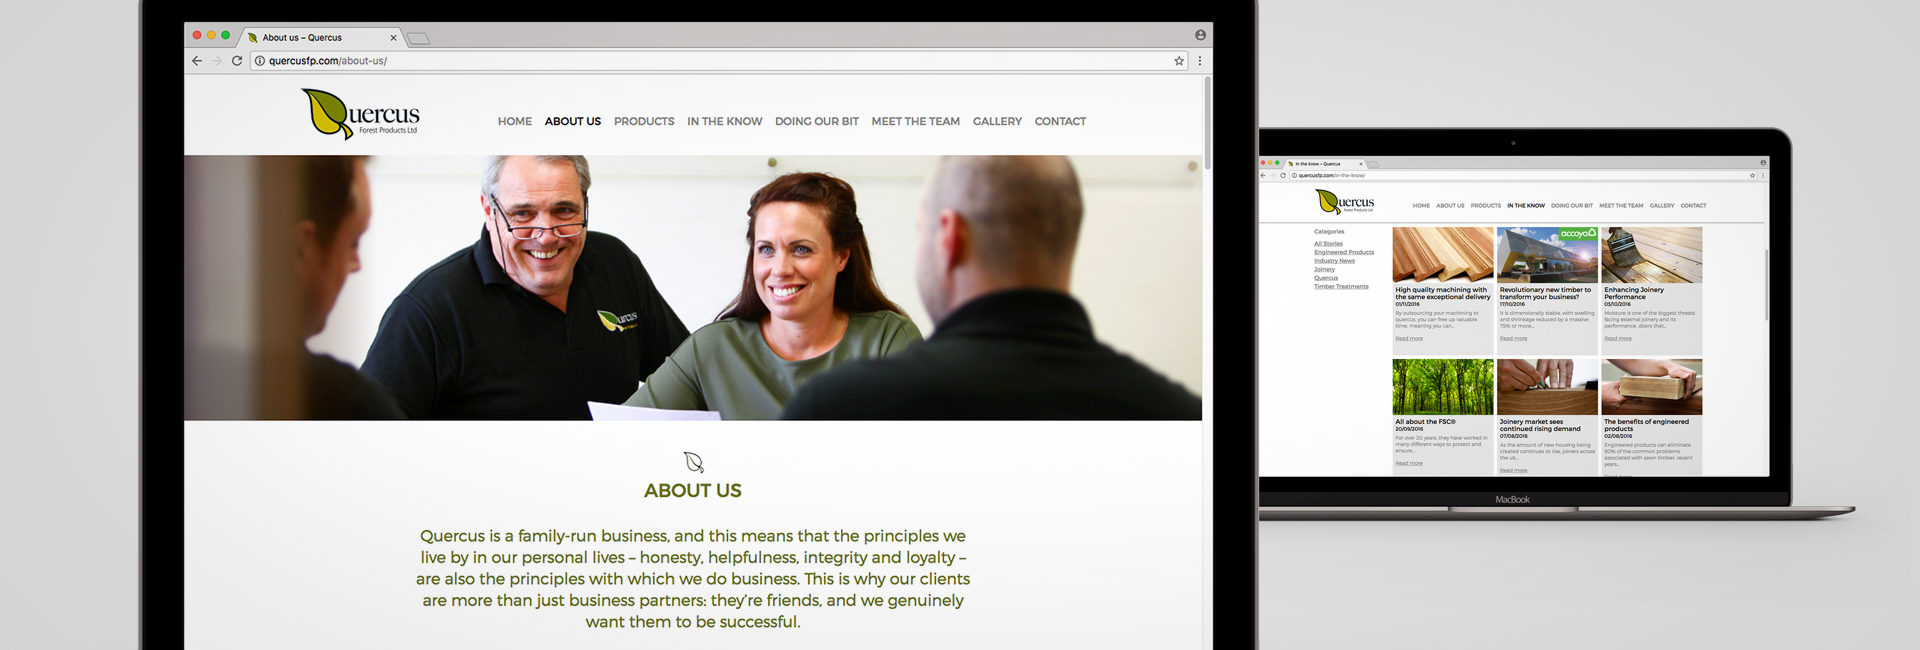 The launch of the Quercus website